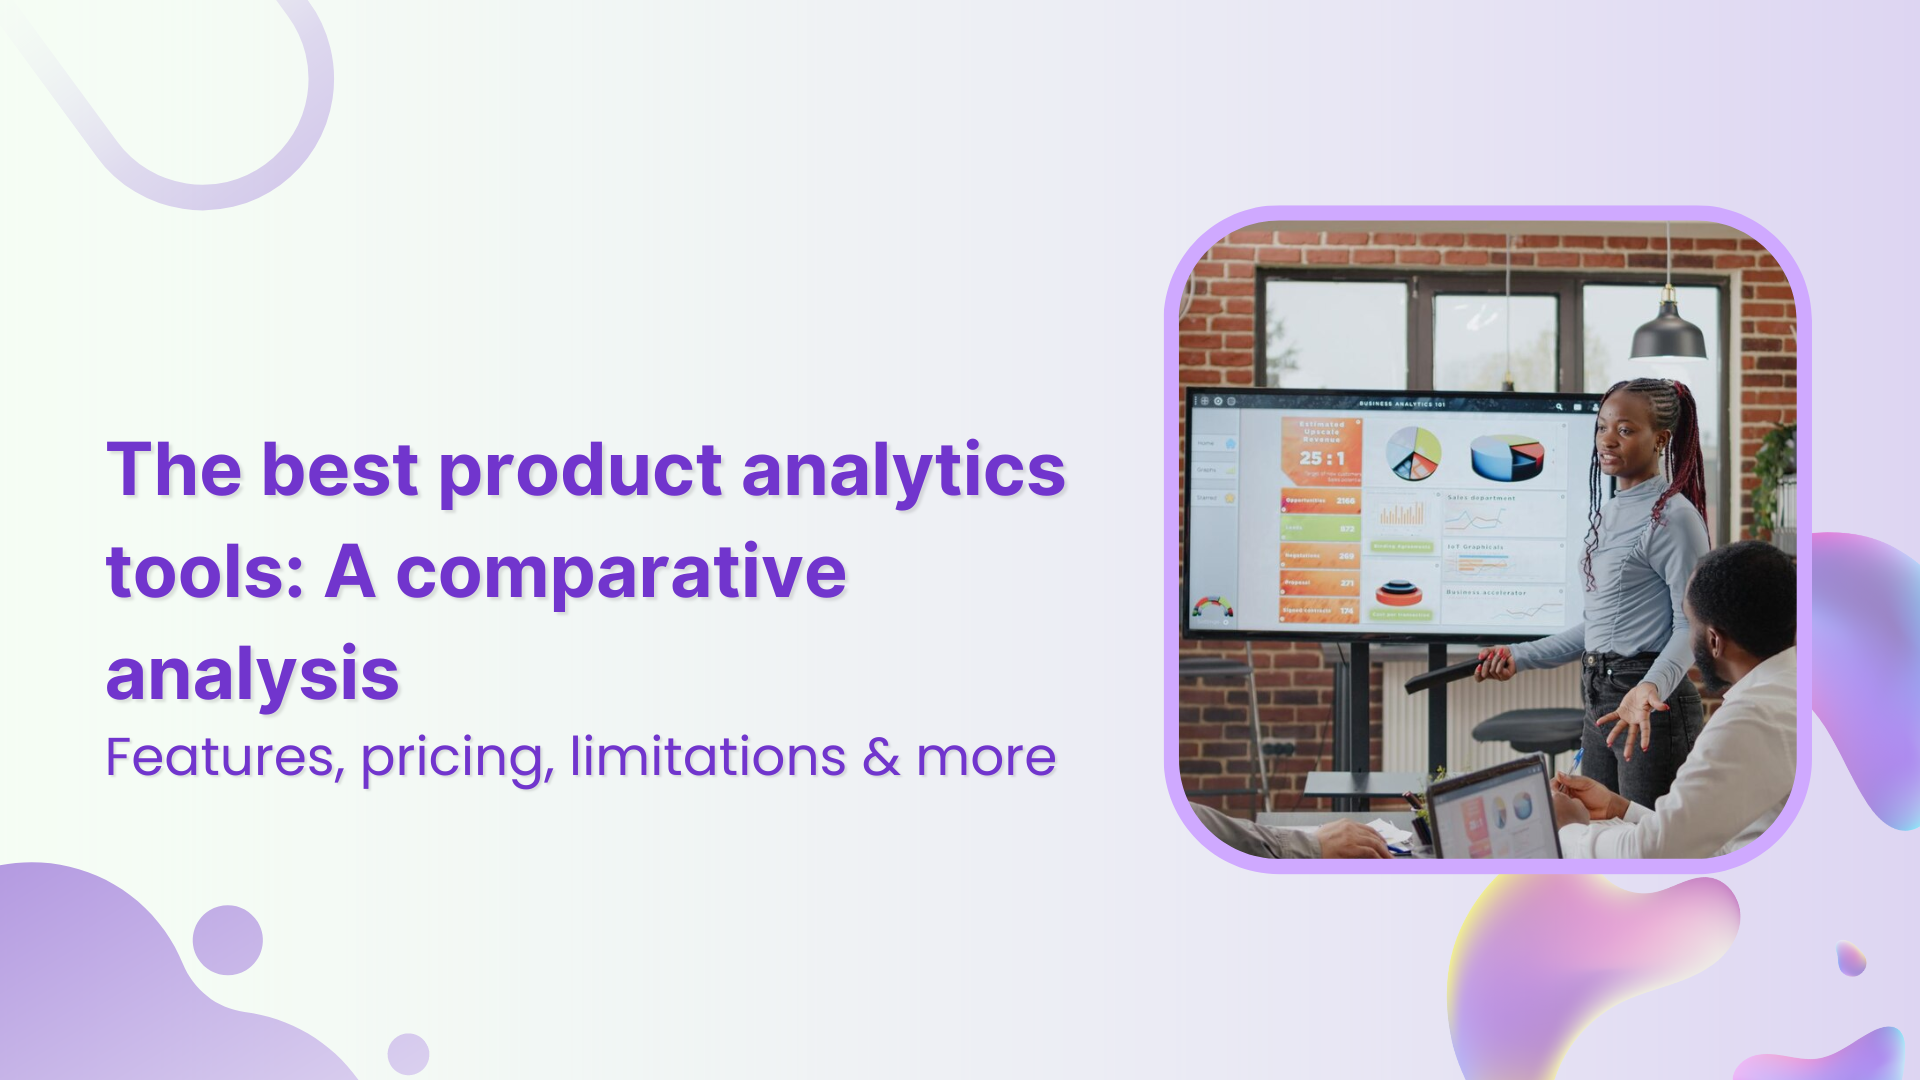 9 best product analytics tools: A comparative analysis